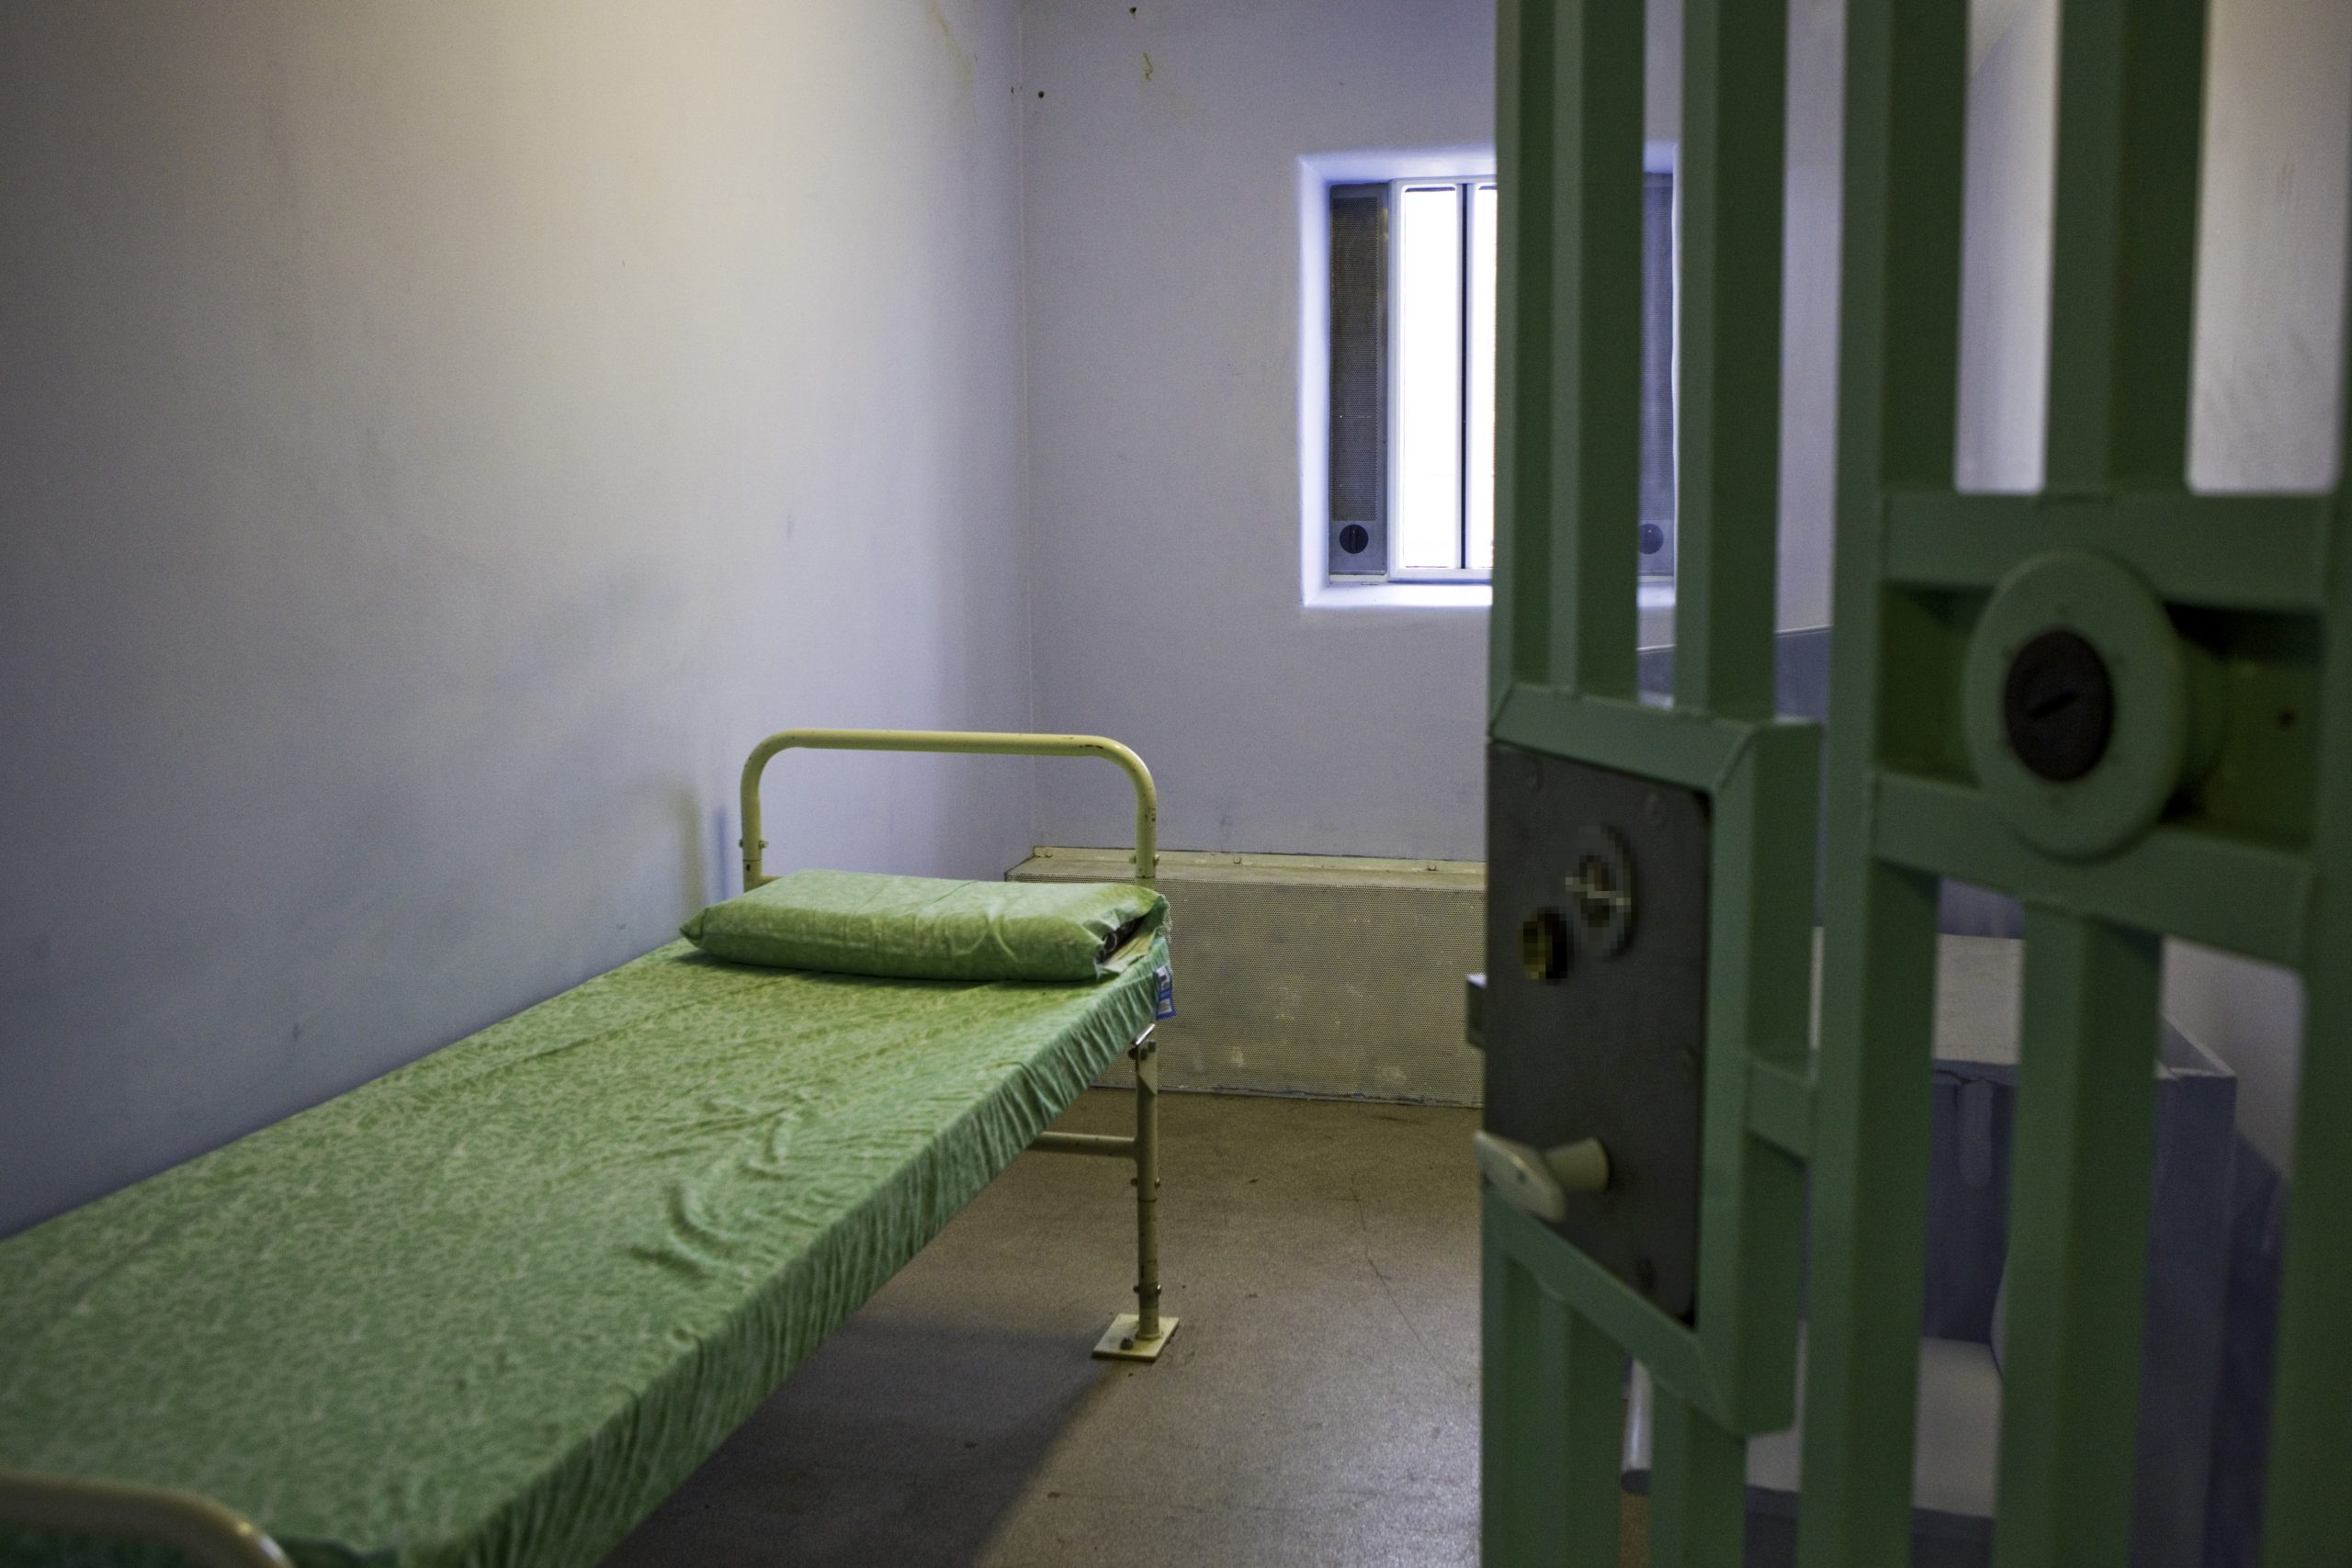 Courts should take into account ‘terrible' prison conditions when sentencing young offenders